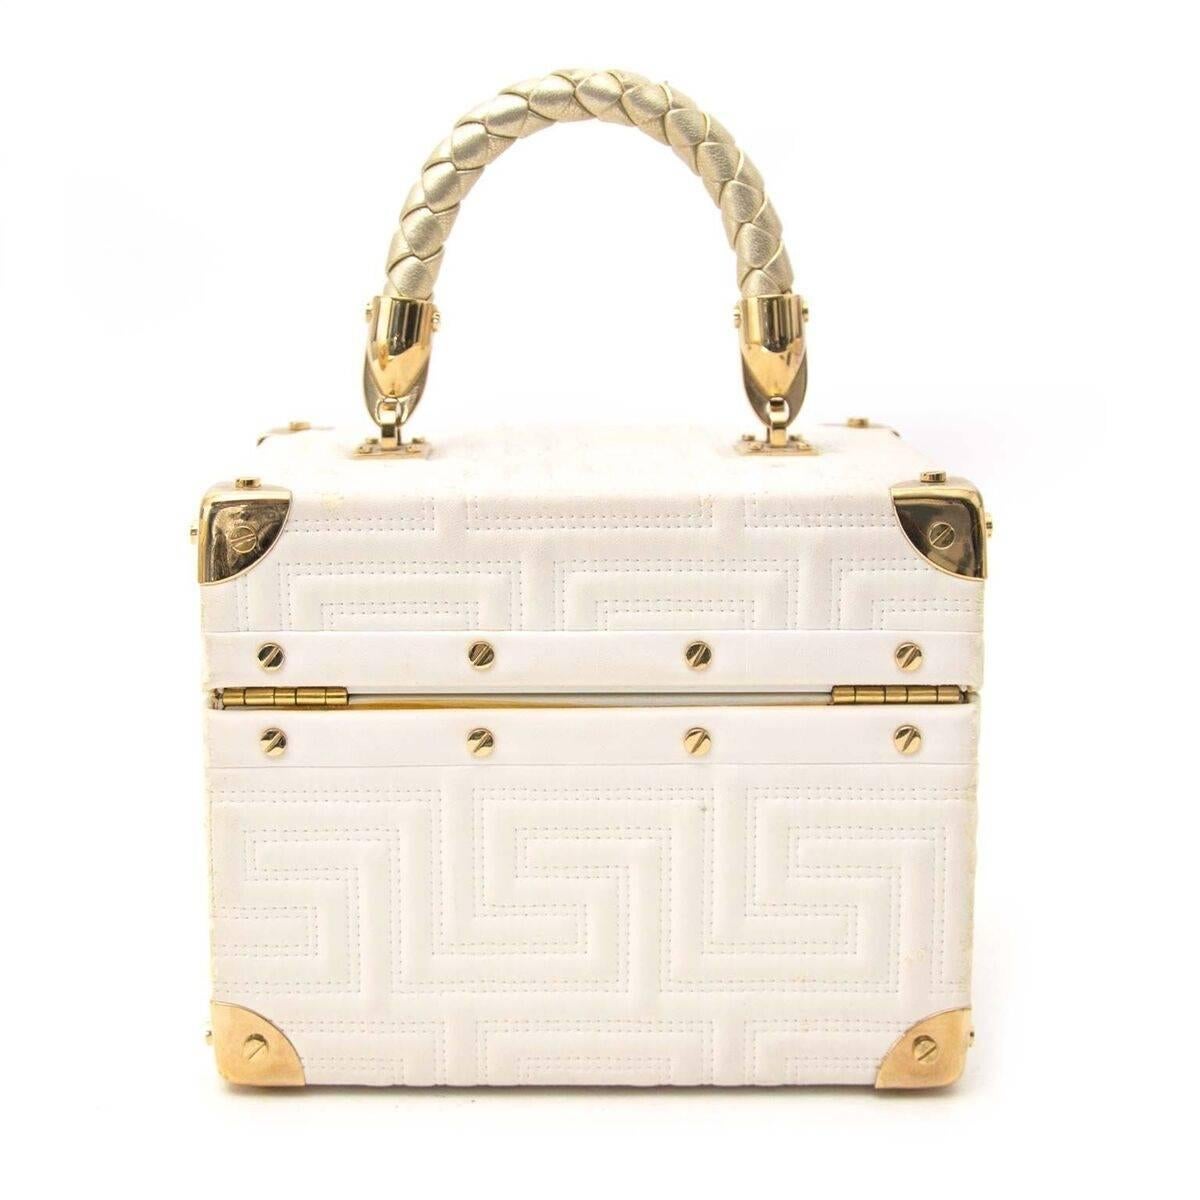 Preloved condition

Estimated retail price: €760

Gianni Versace Couture Luxury Fragrance Traincase

This limited edition Case is hand stitched and costum made. The ouside is made out of rich nappa snow white leather. 
Finished with gold studs and